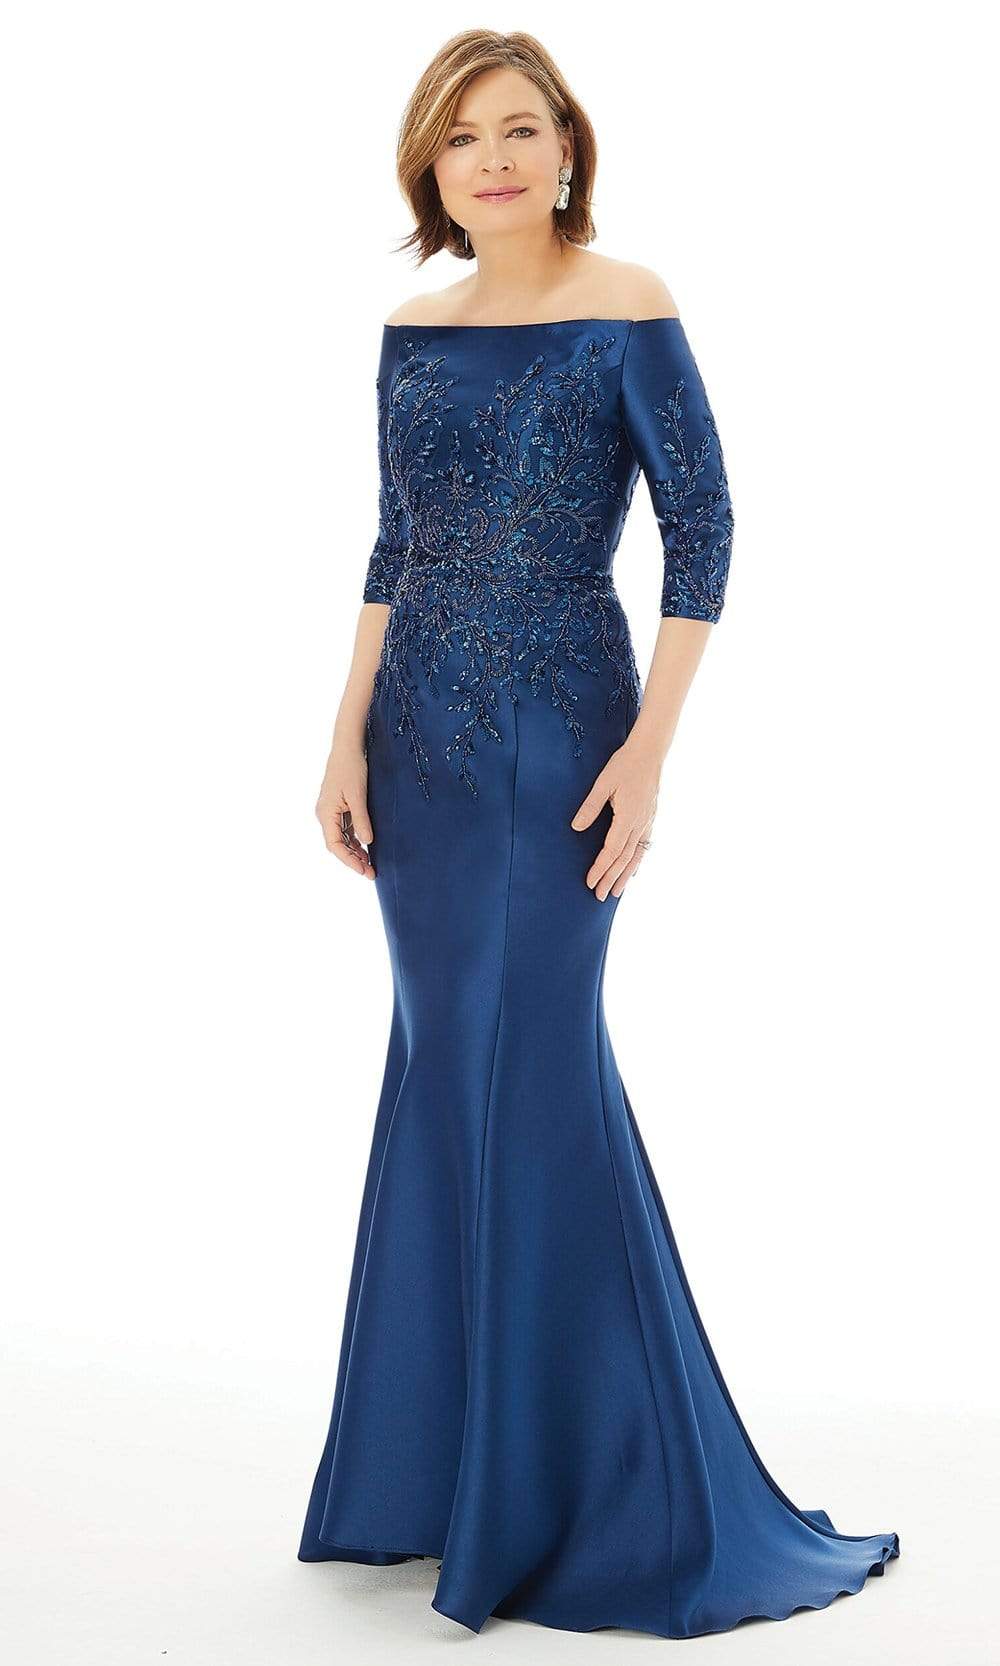 MGNY By Mori Lee - 72213 Beaded Embellished Bodice Satin Mermaid Gown Mother of the Bride Dresses 2 / Navy